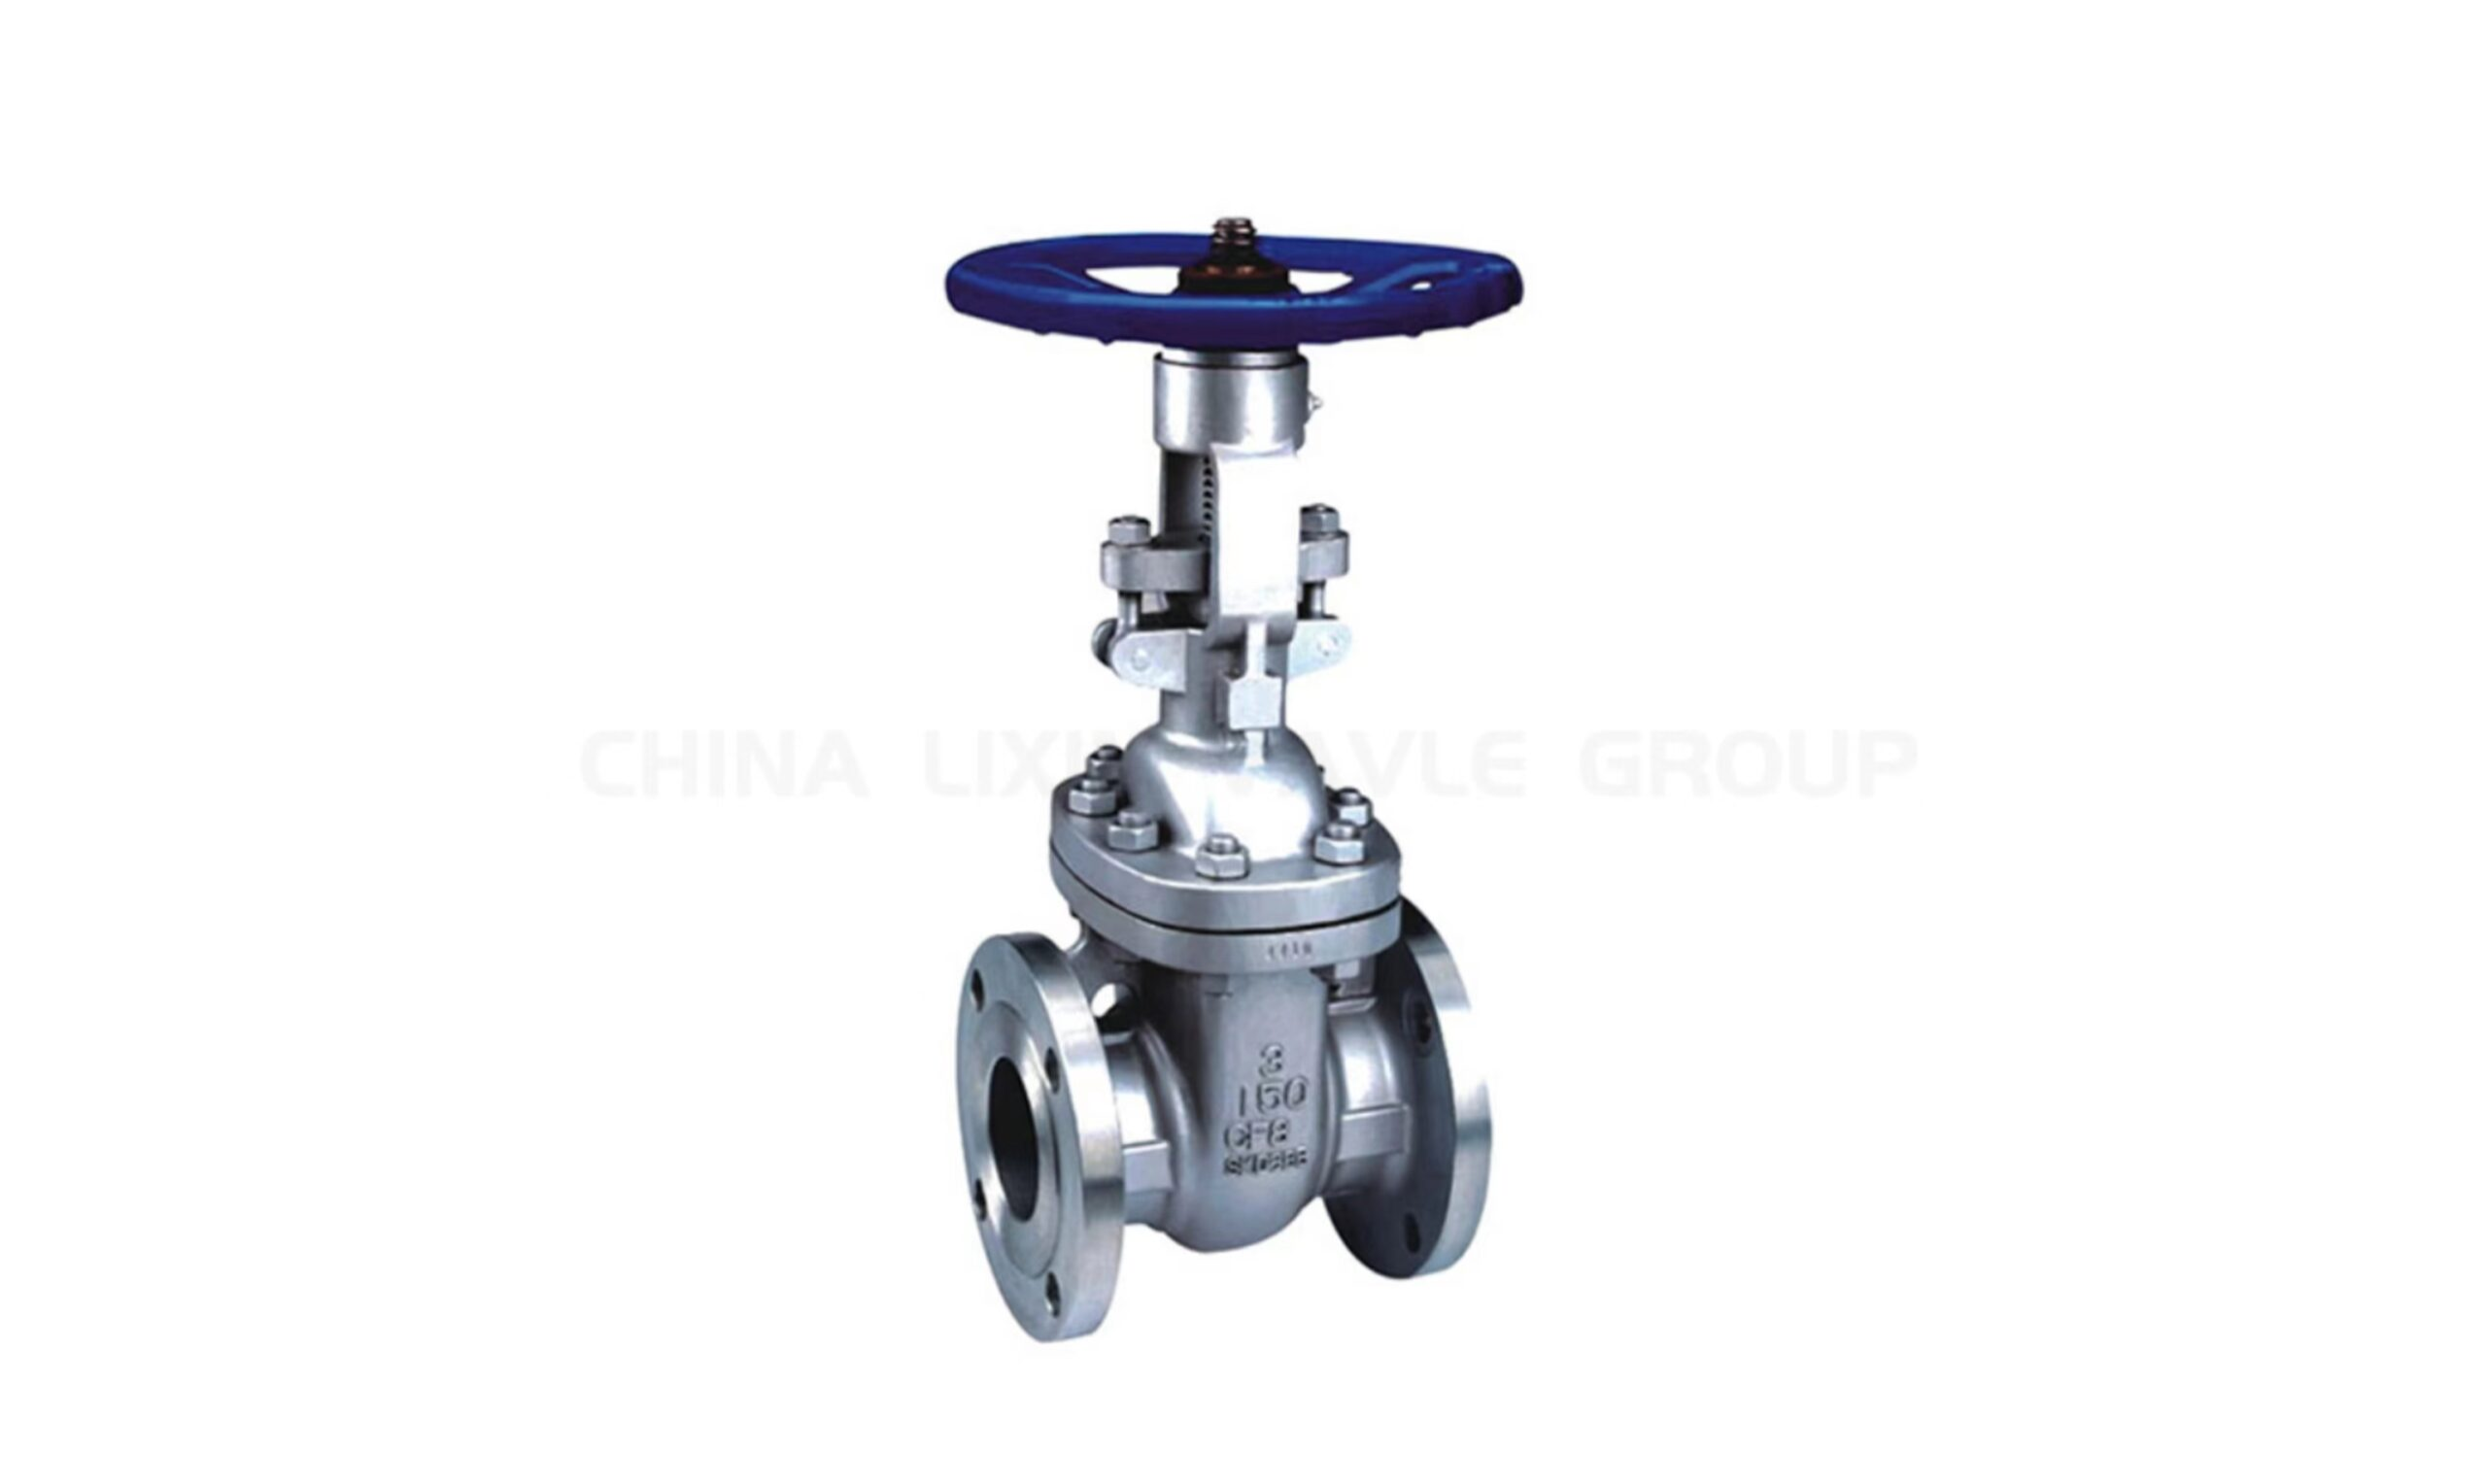 A close-up of a gate valve with a round handle. The valve is made of metal and is used to control the flow of liquids or gases.